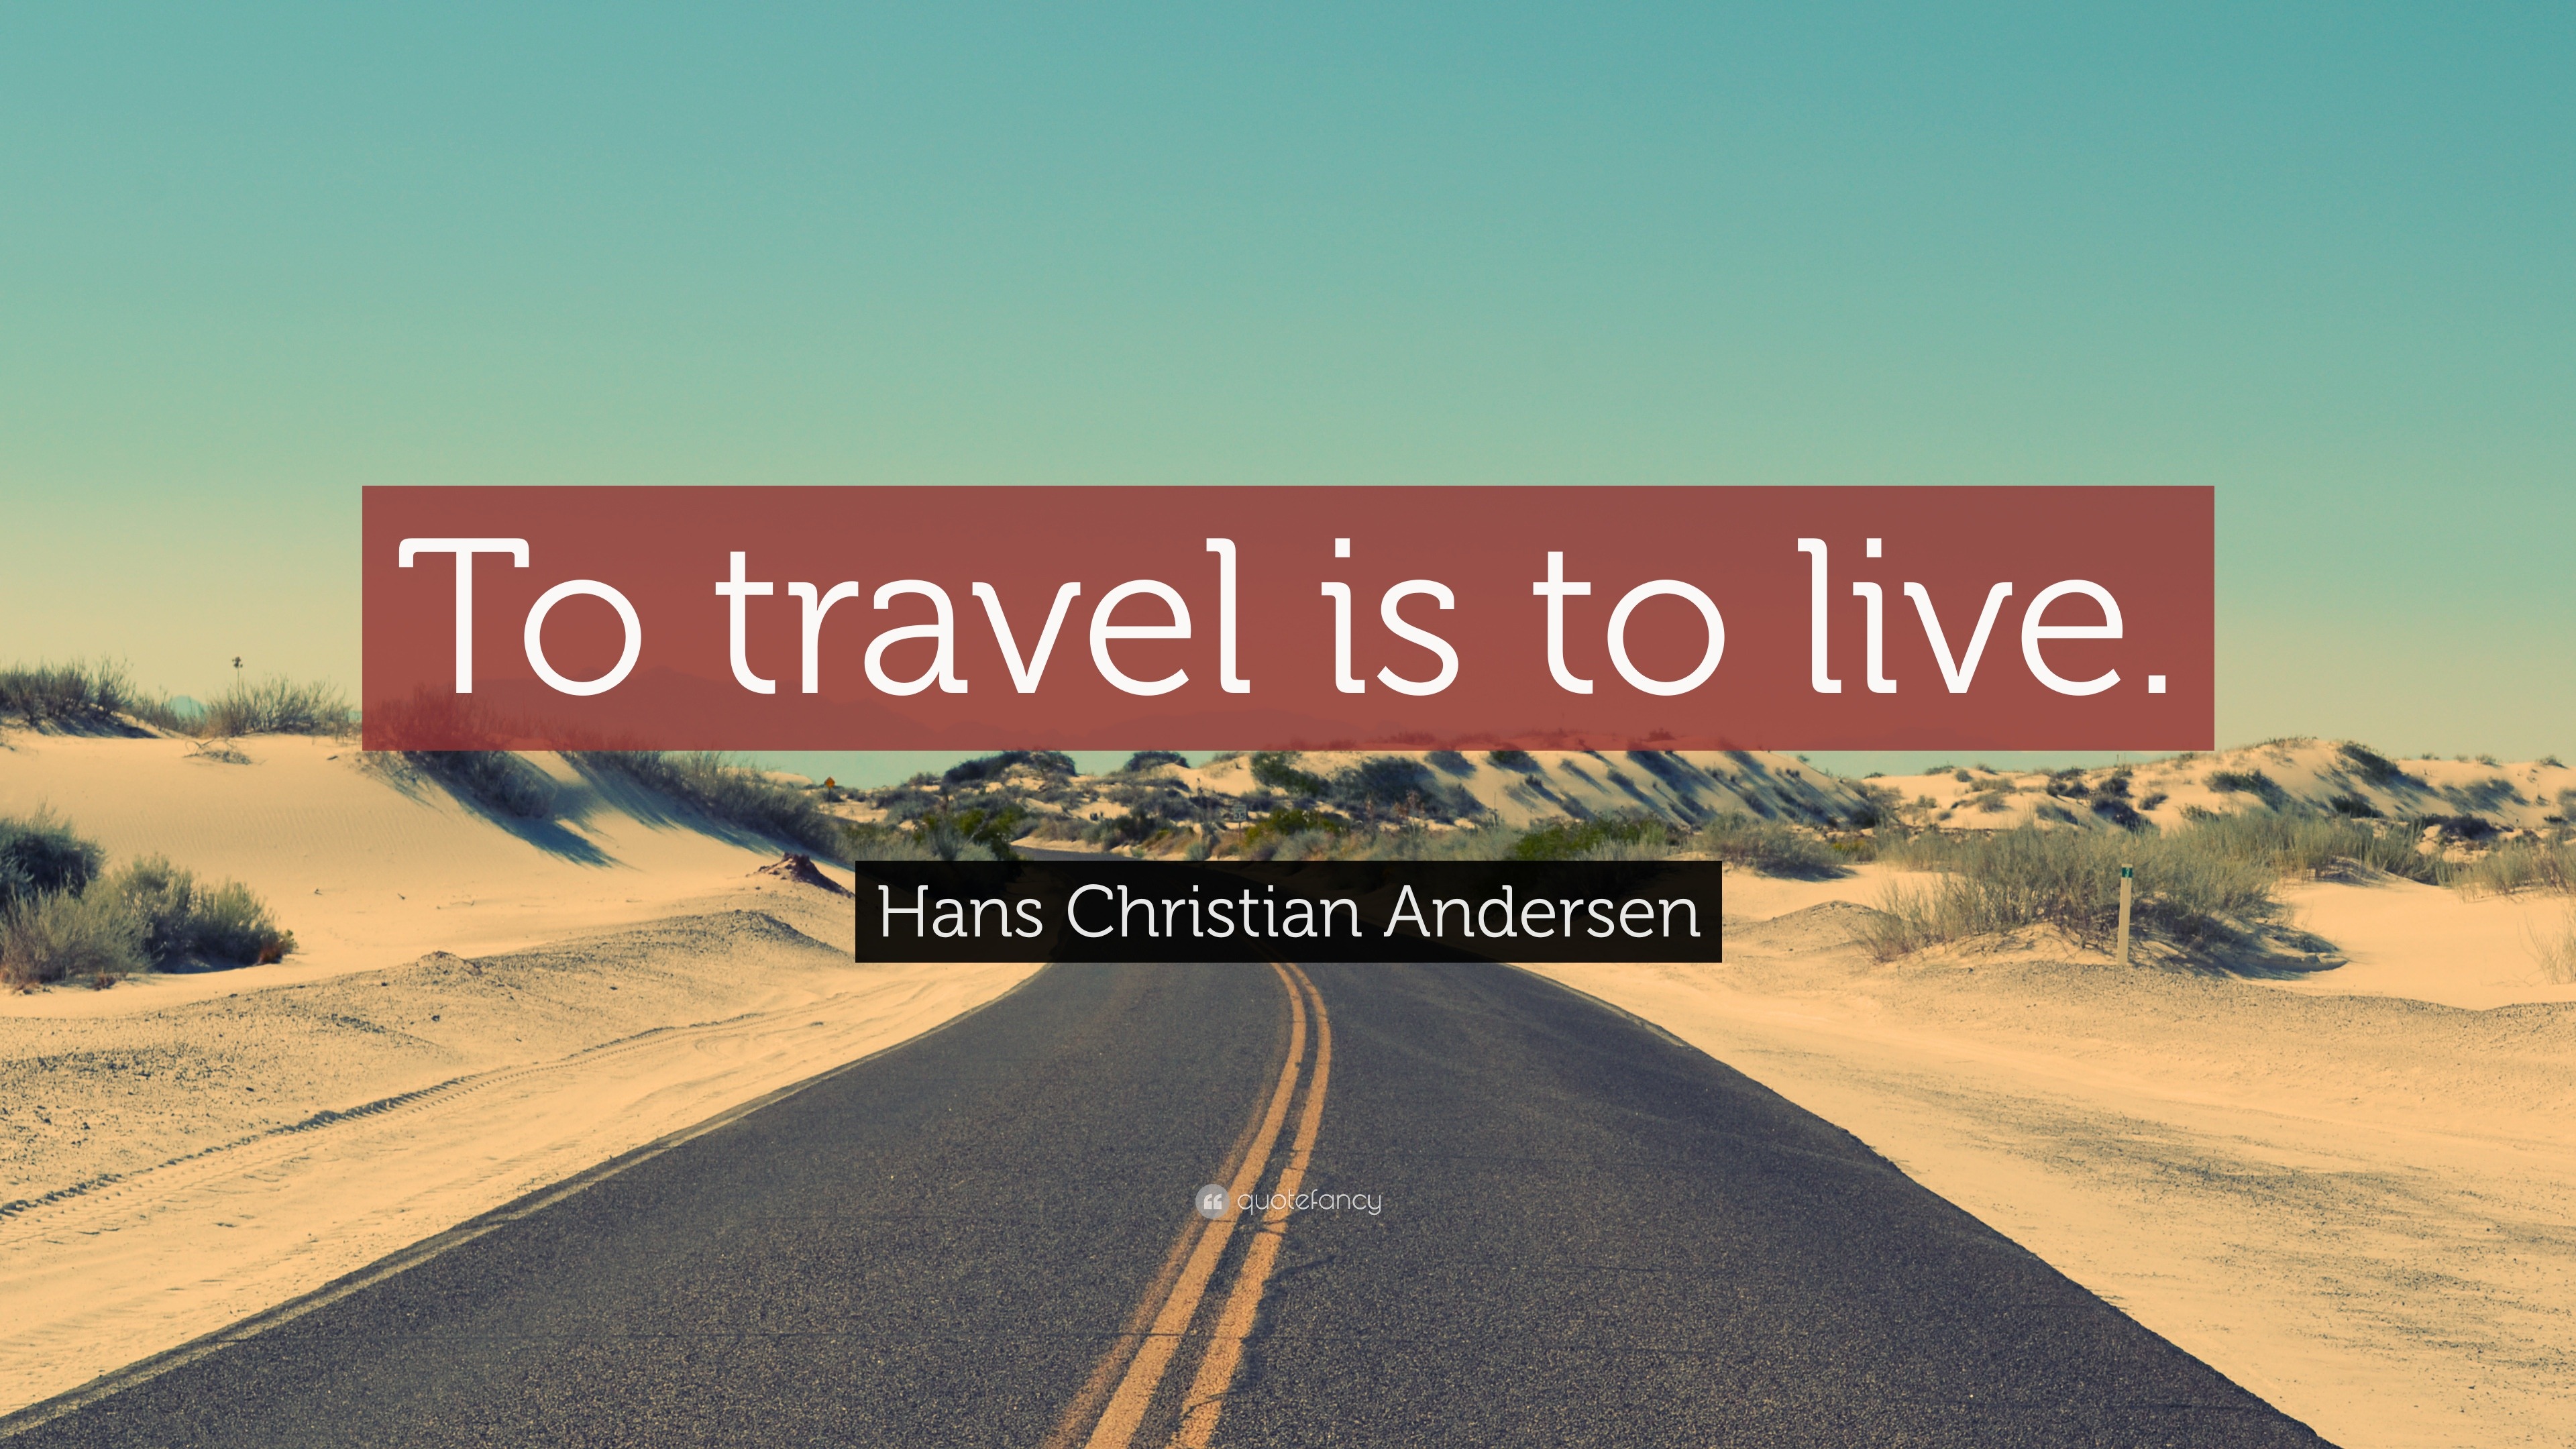 Hans Christian Andersen Quote: “To travel is to live.”